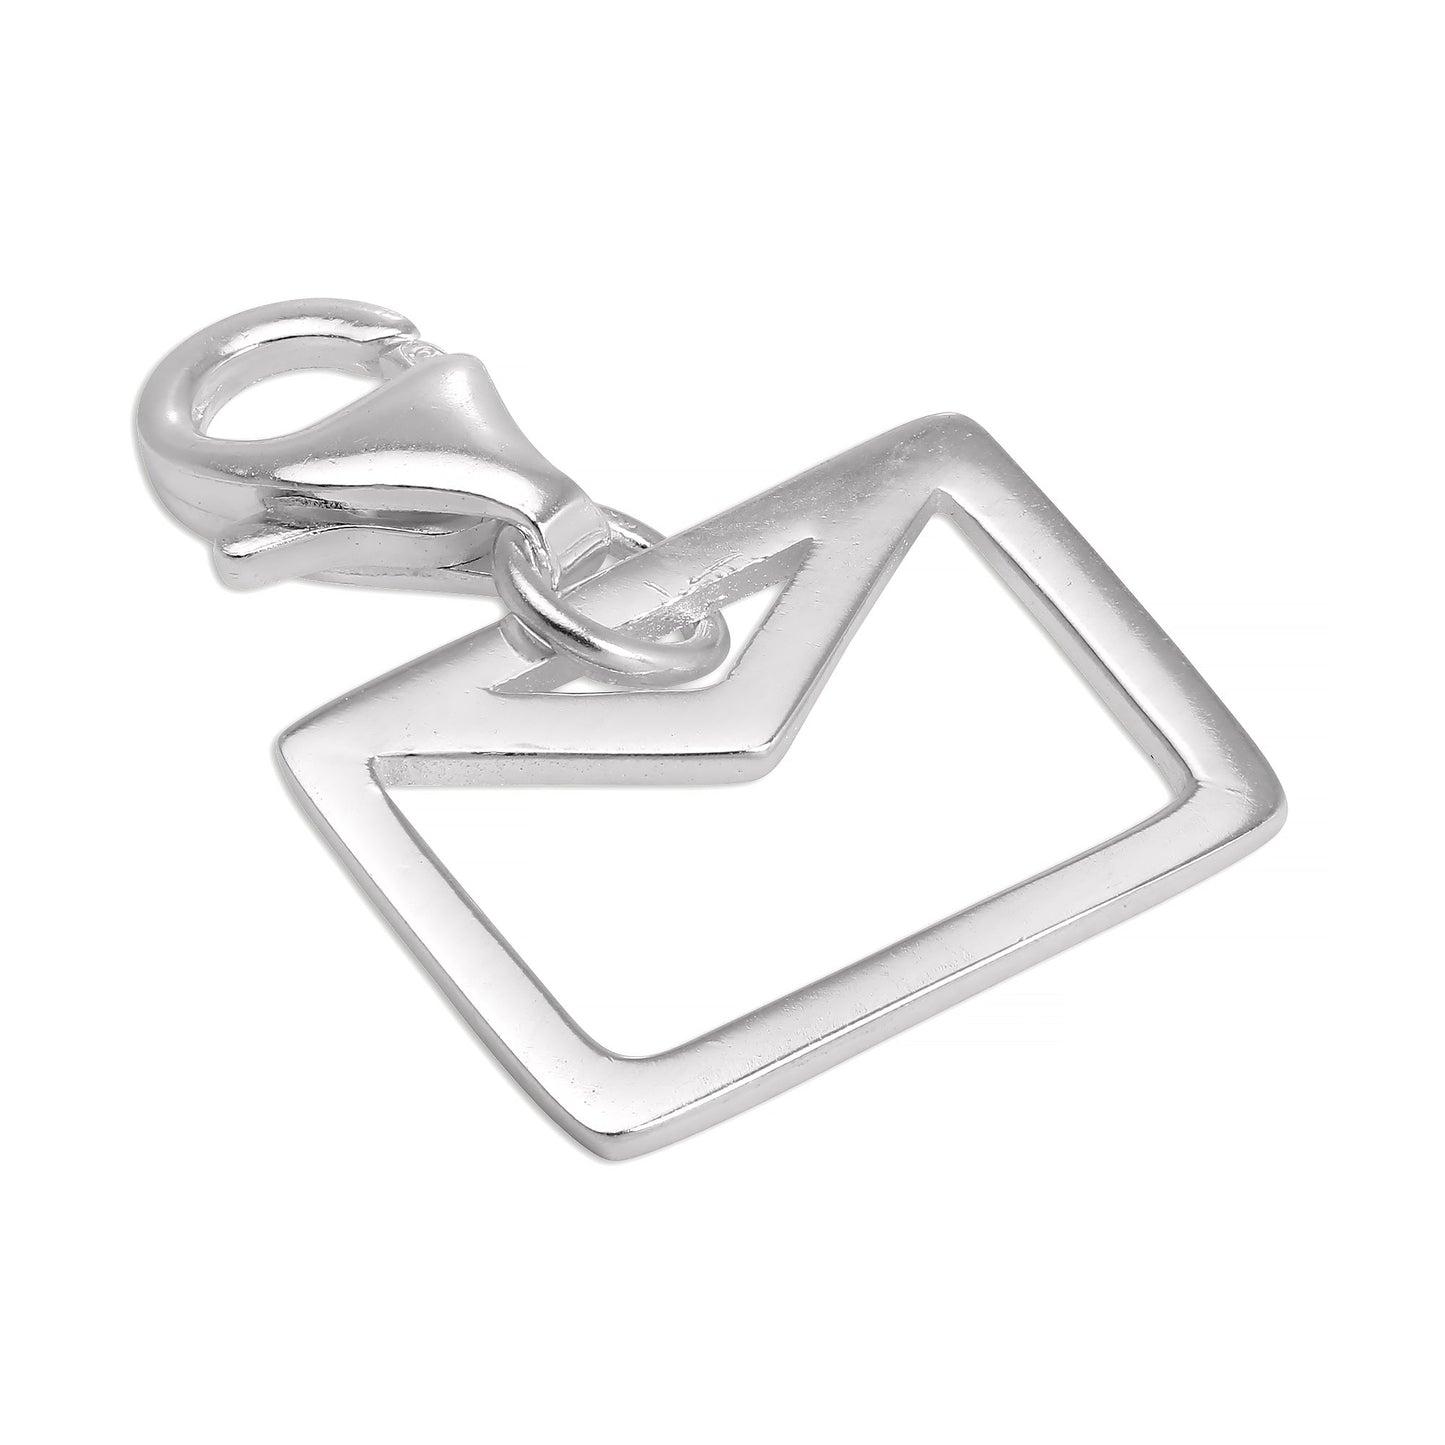 Sterling Silver Cut Out Letter Clip on Charm